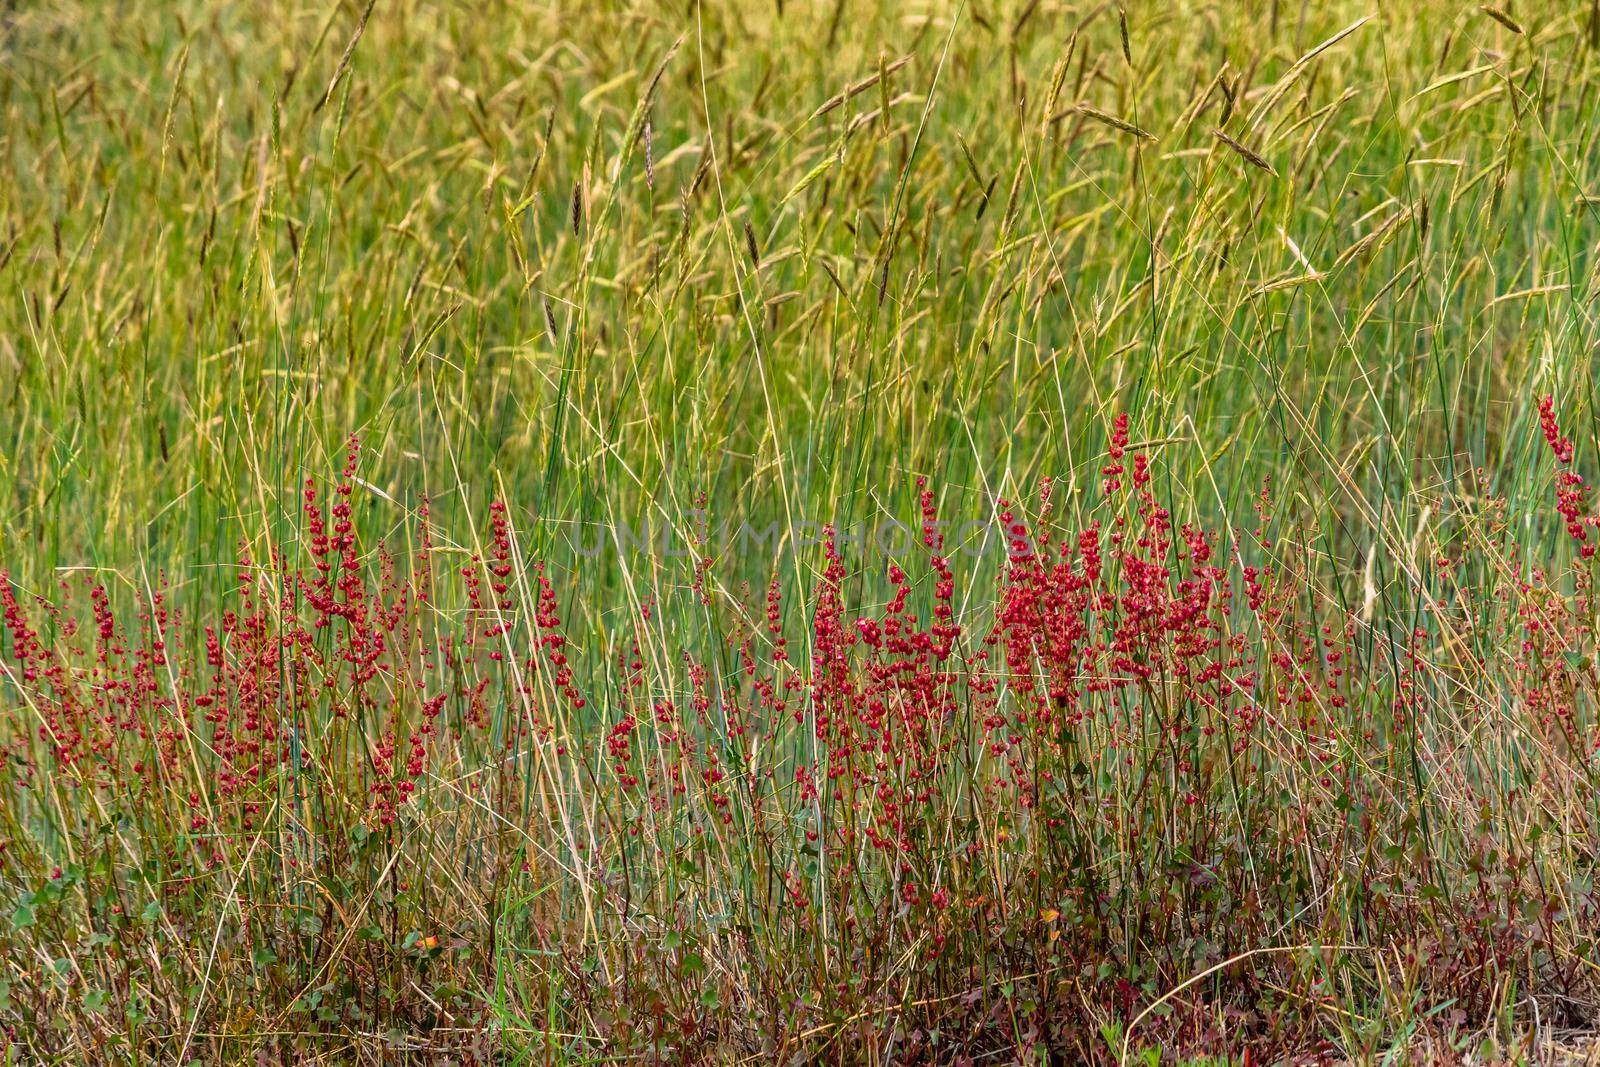 Typical small red flowers of Etna volcano landscapes in summer. Sicily, Italy